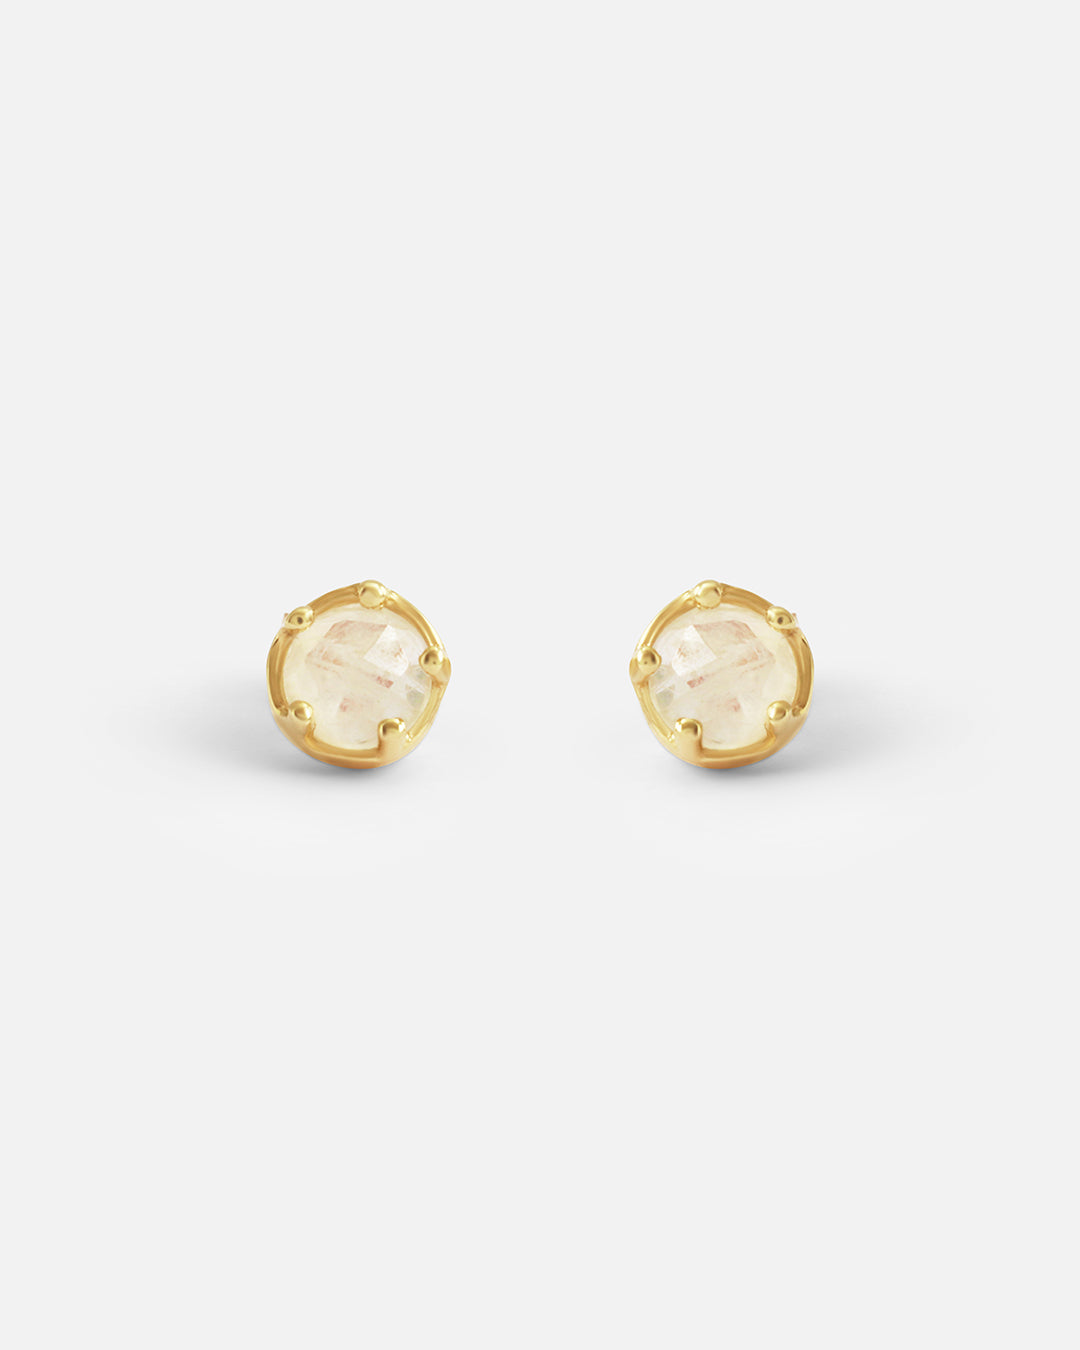 Front view of Moonstone / Yellow Gold Studs by Ariko